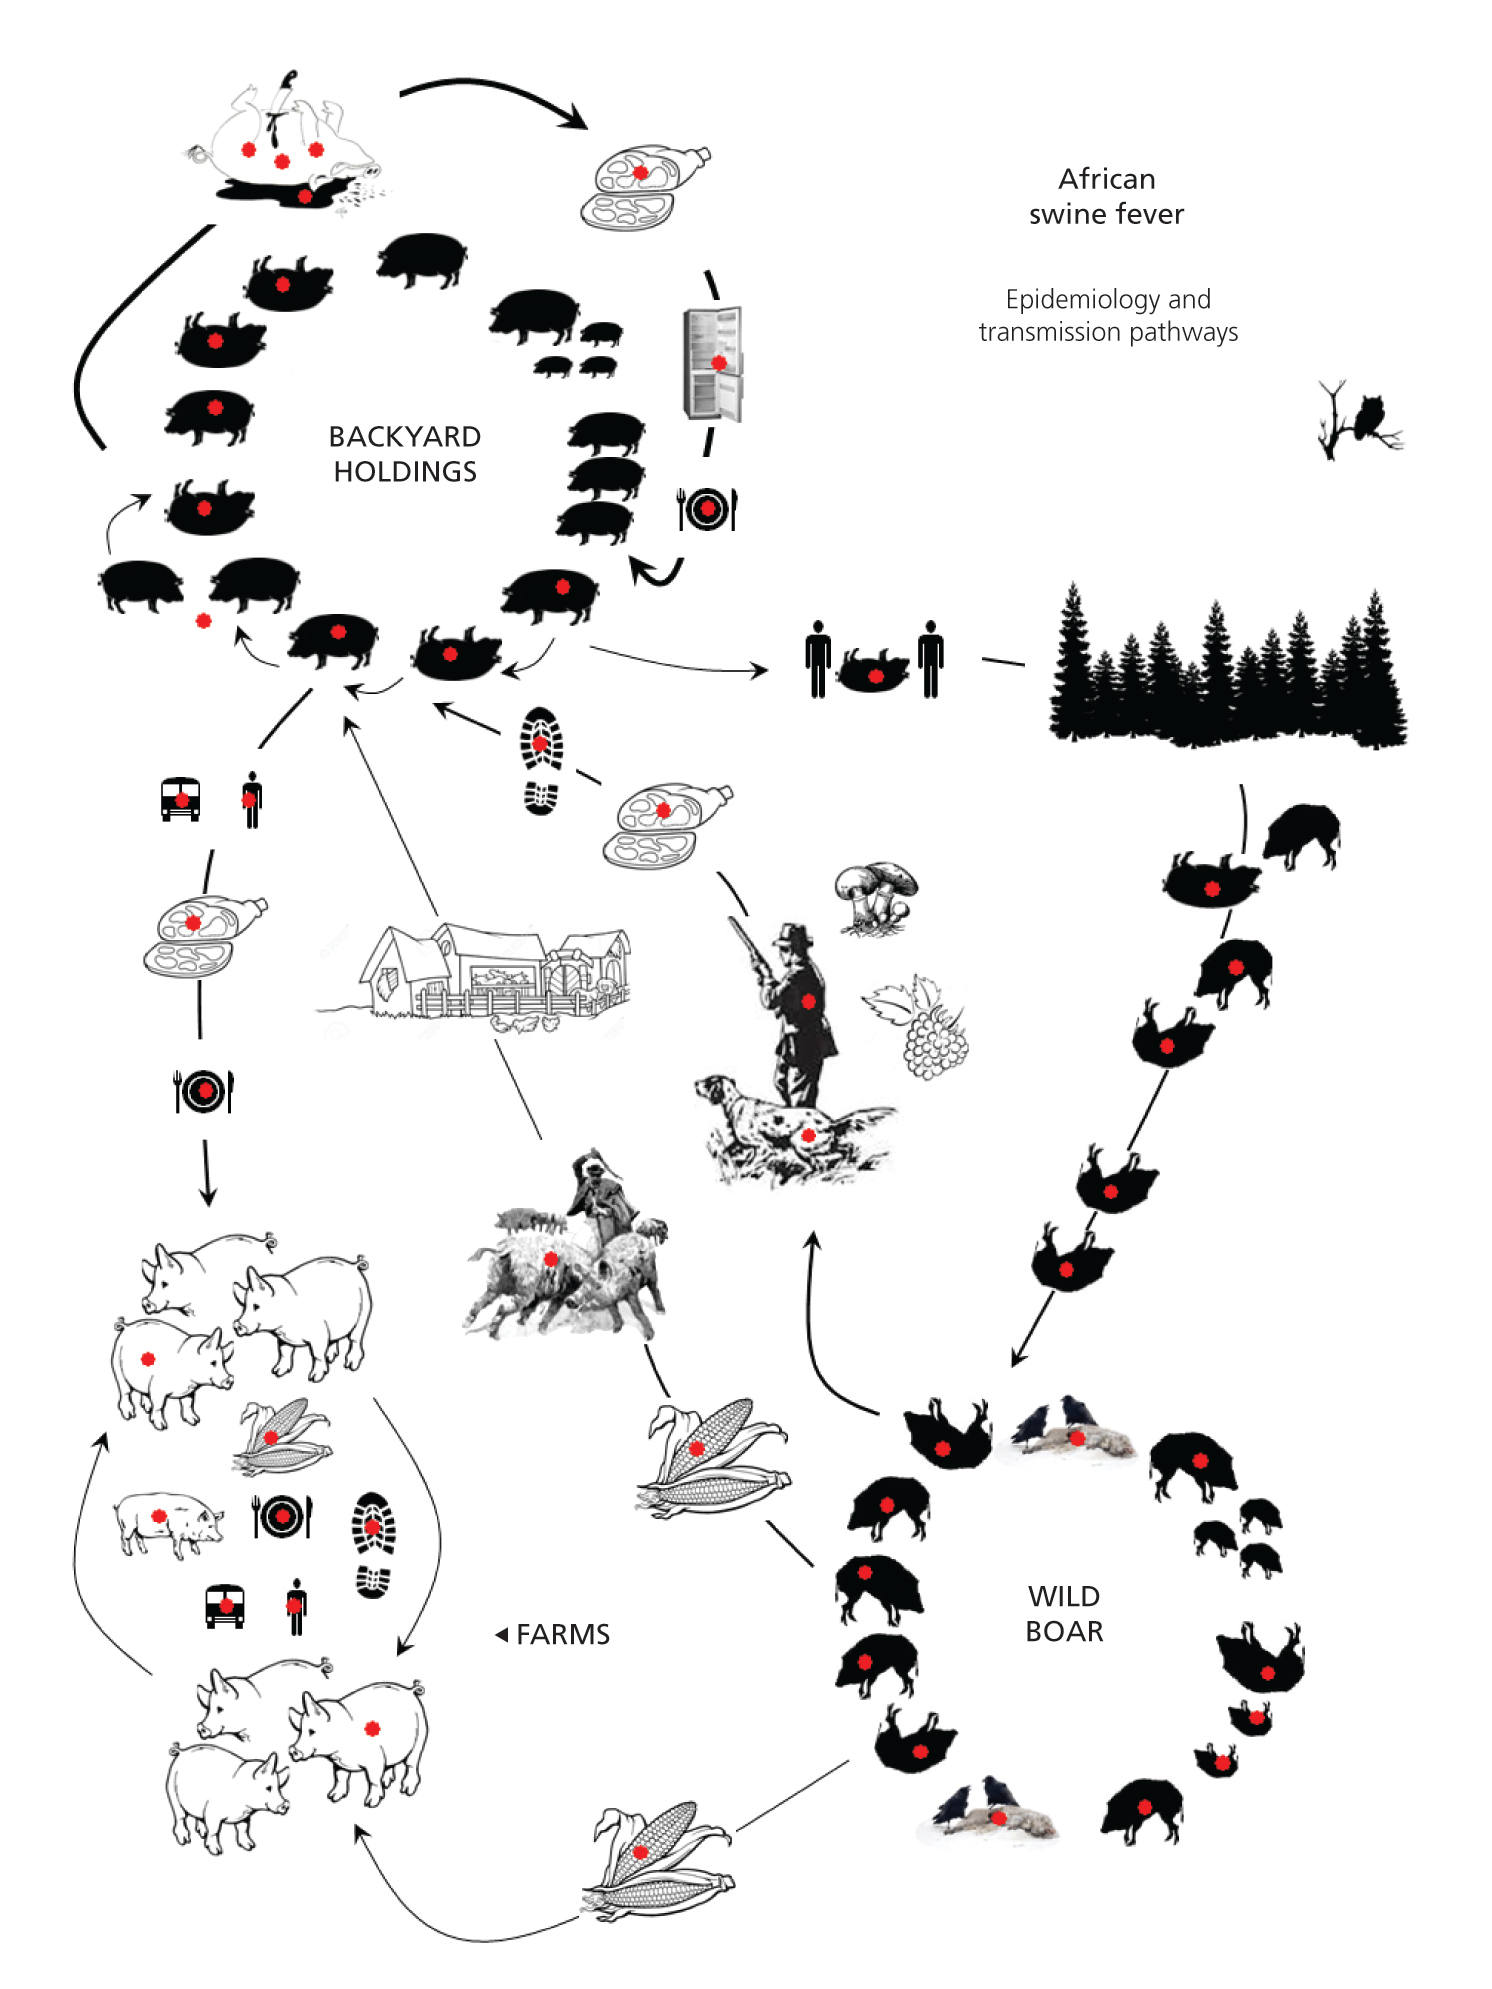 Fig. 1 The ecological complexity of African swine fever